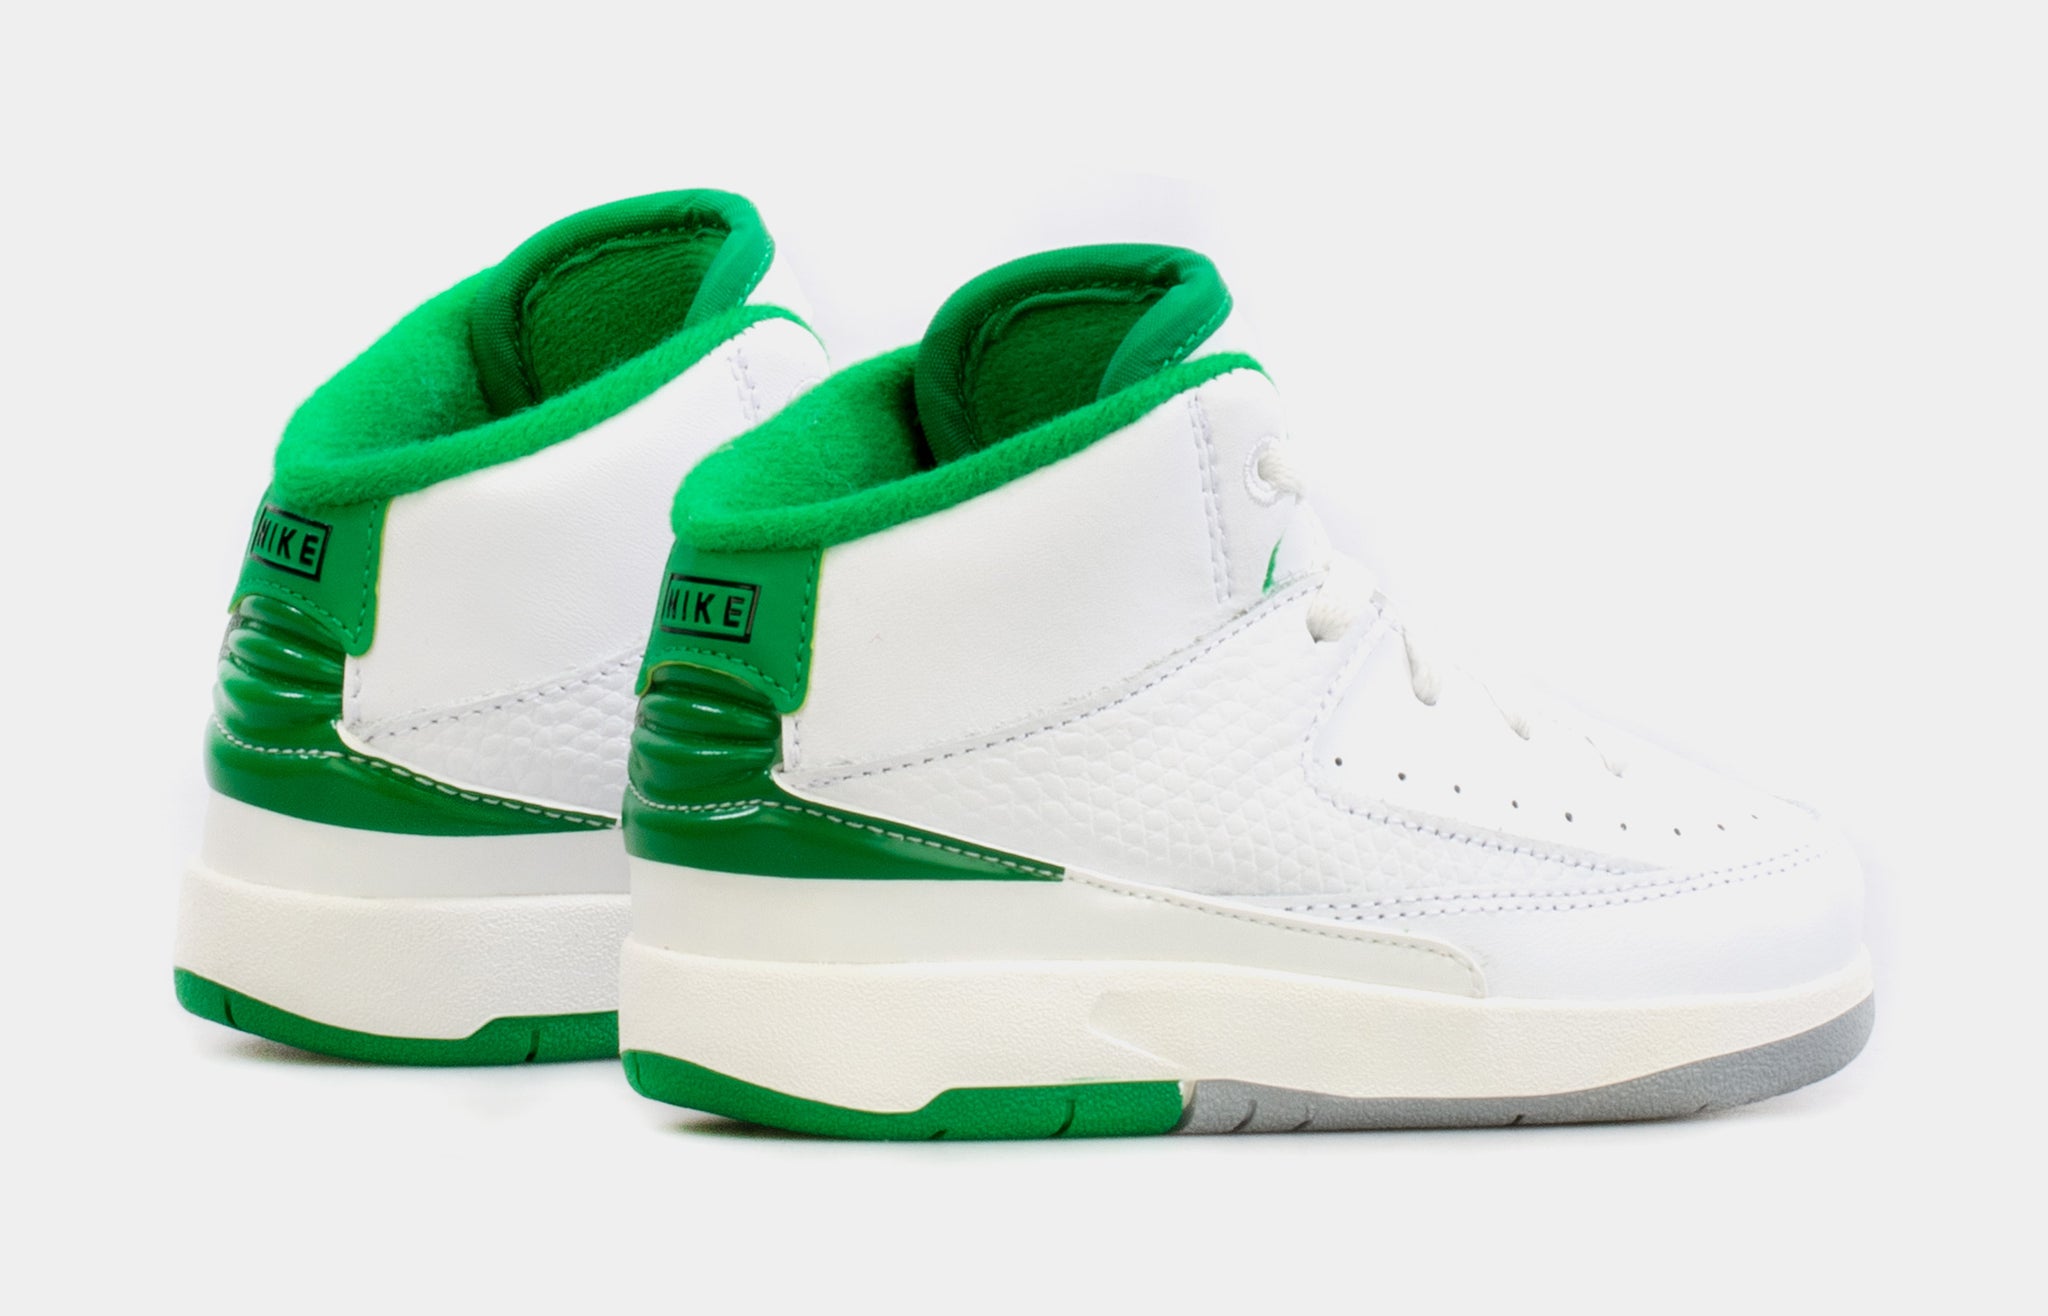 Air Jordan 2 Retro Lucky Green Infant Toddler Lifestyle Shoes (White/Green)  Free Shipping